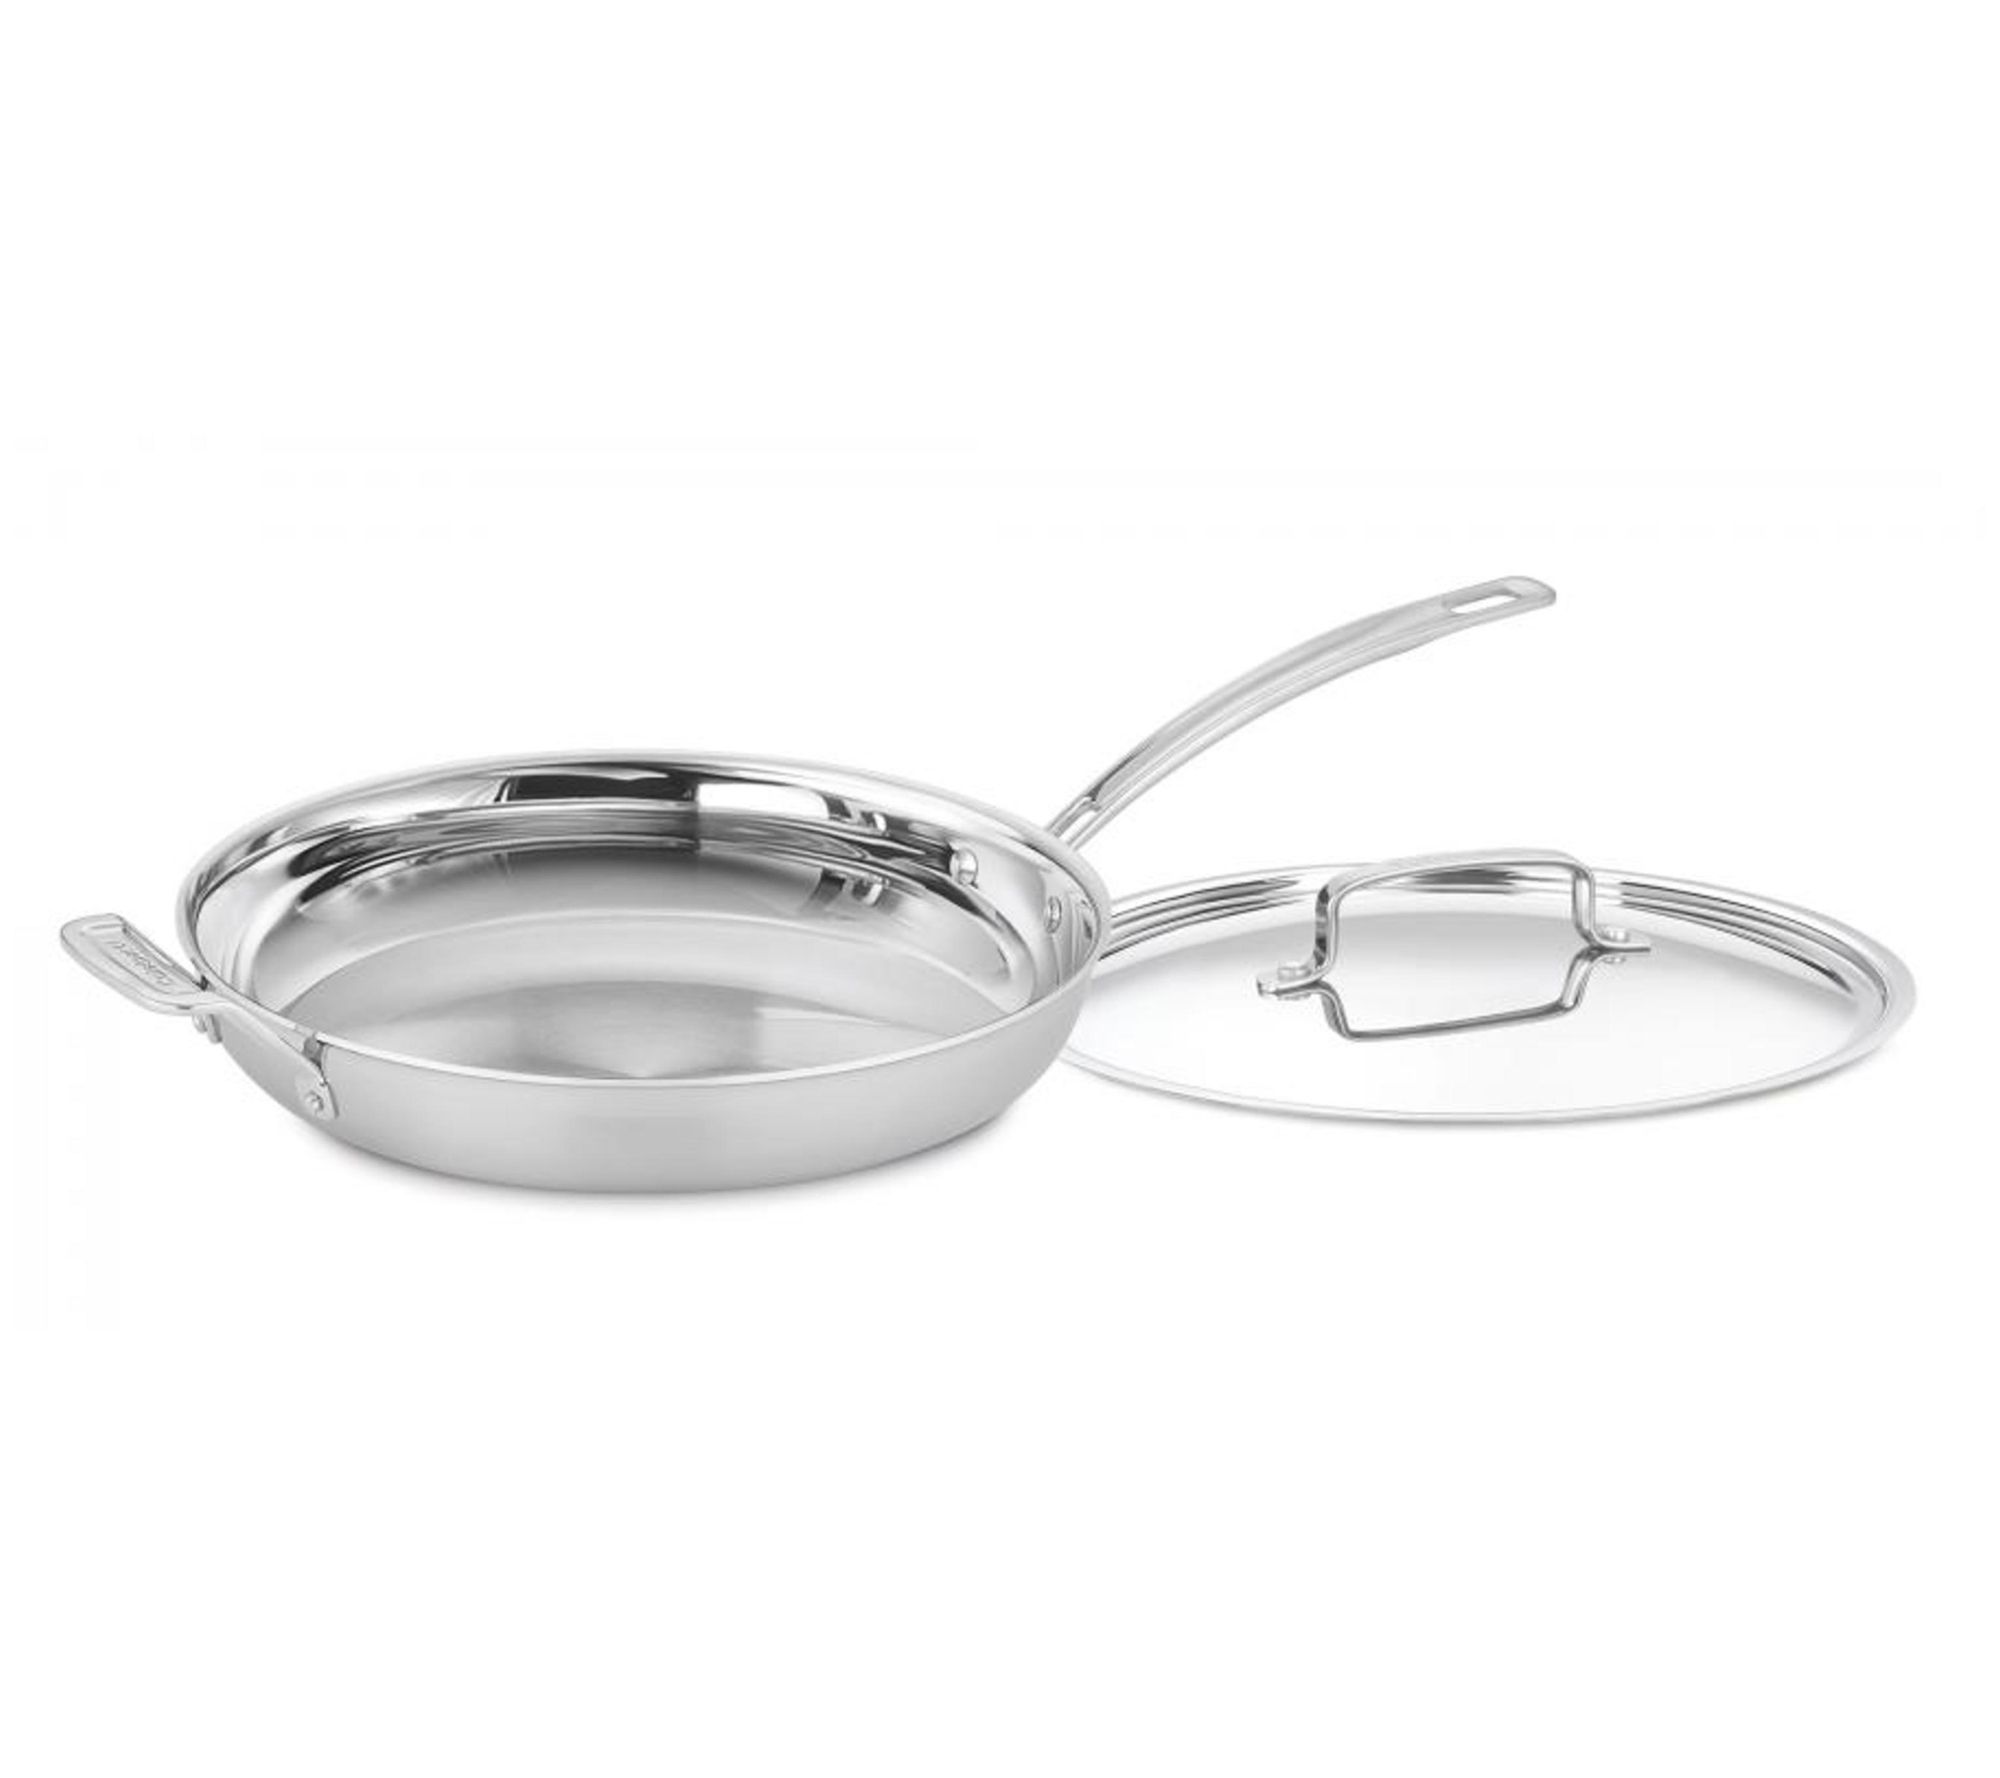 Cuisinart Chef's Classic Stainless Ceramic Nonstick Skillet, Silver, 12